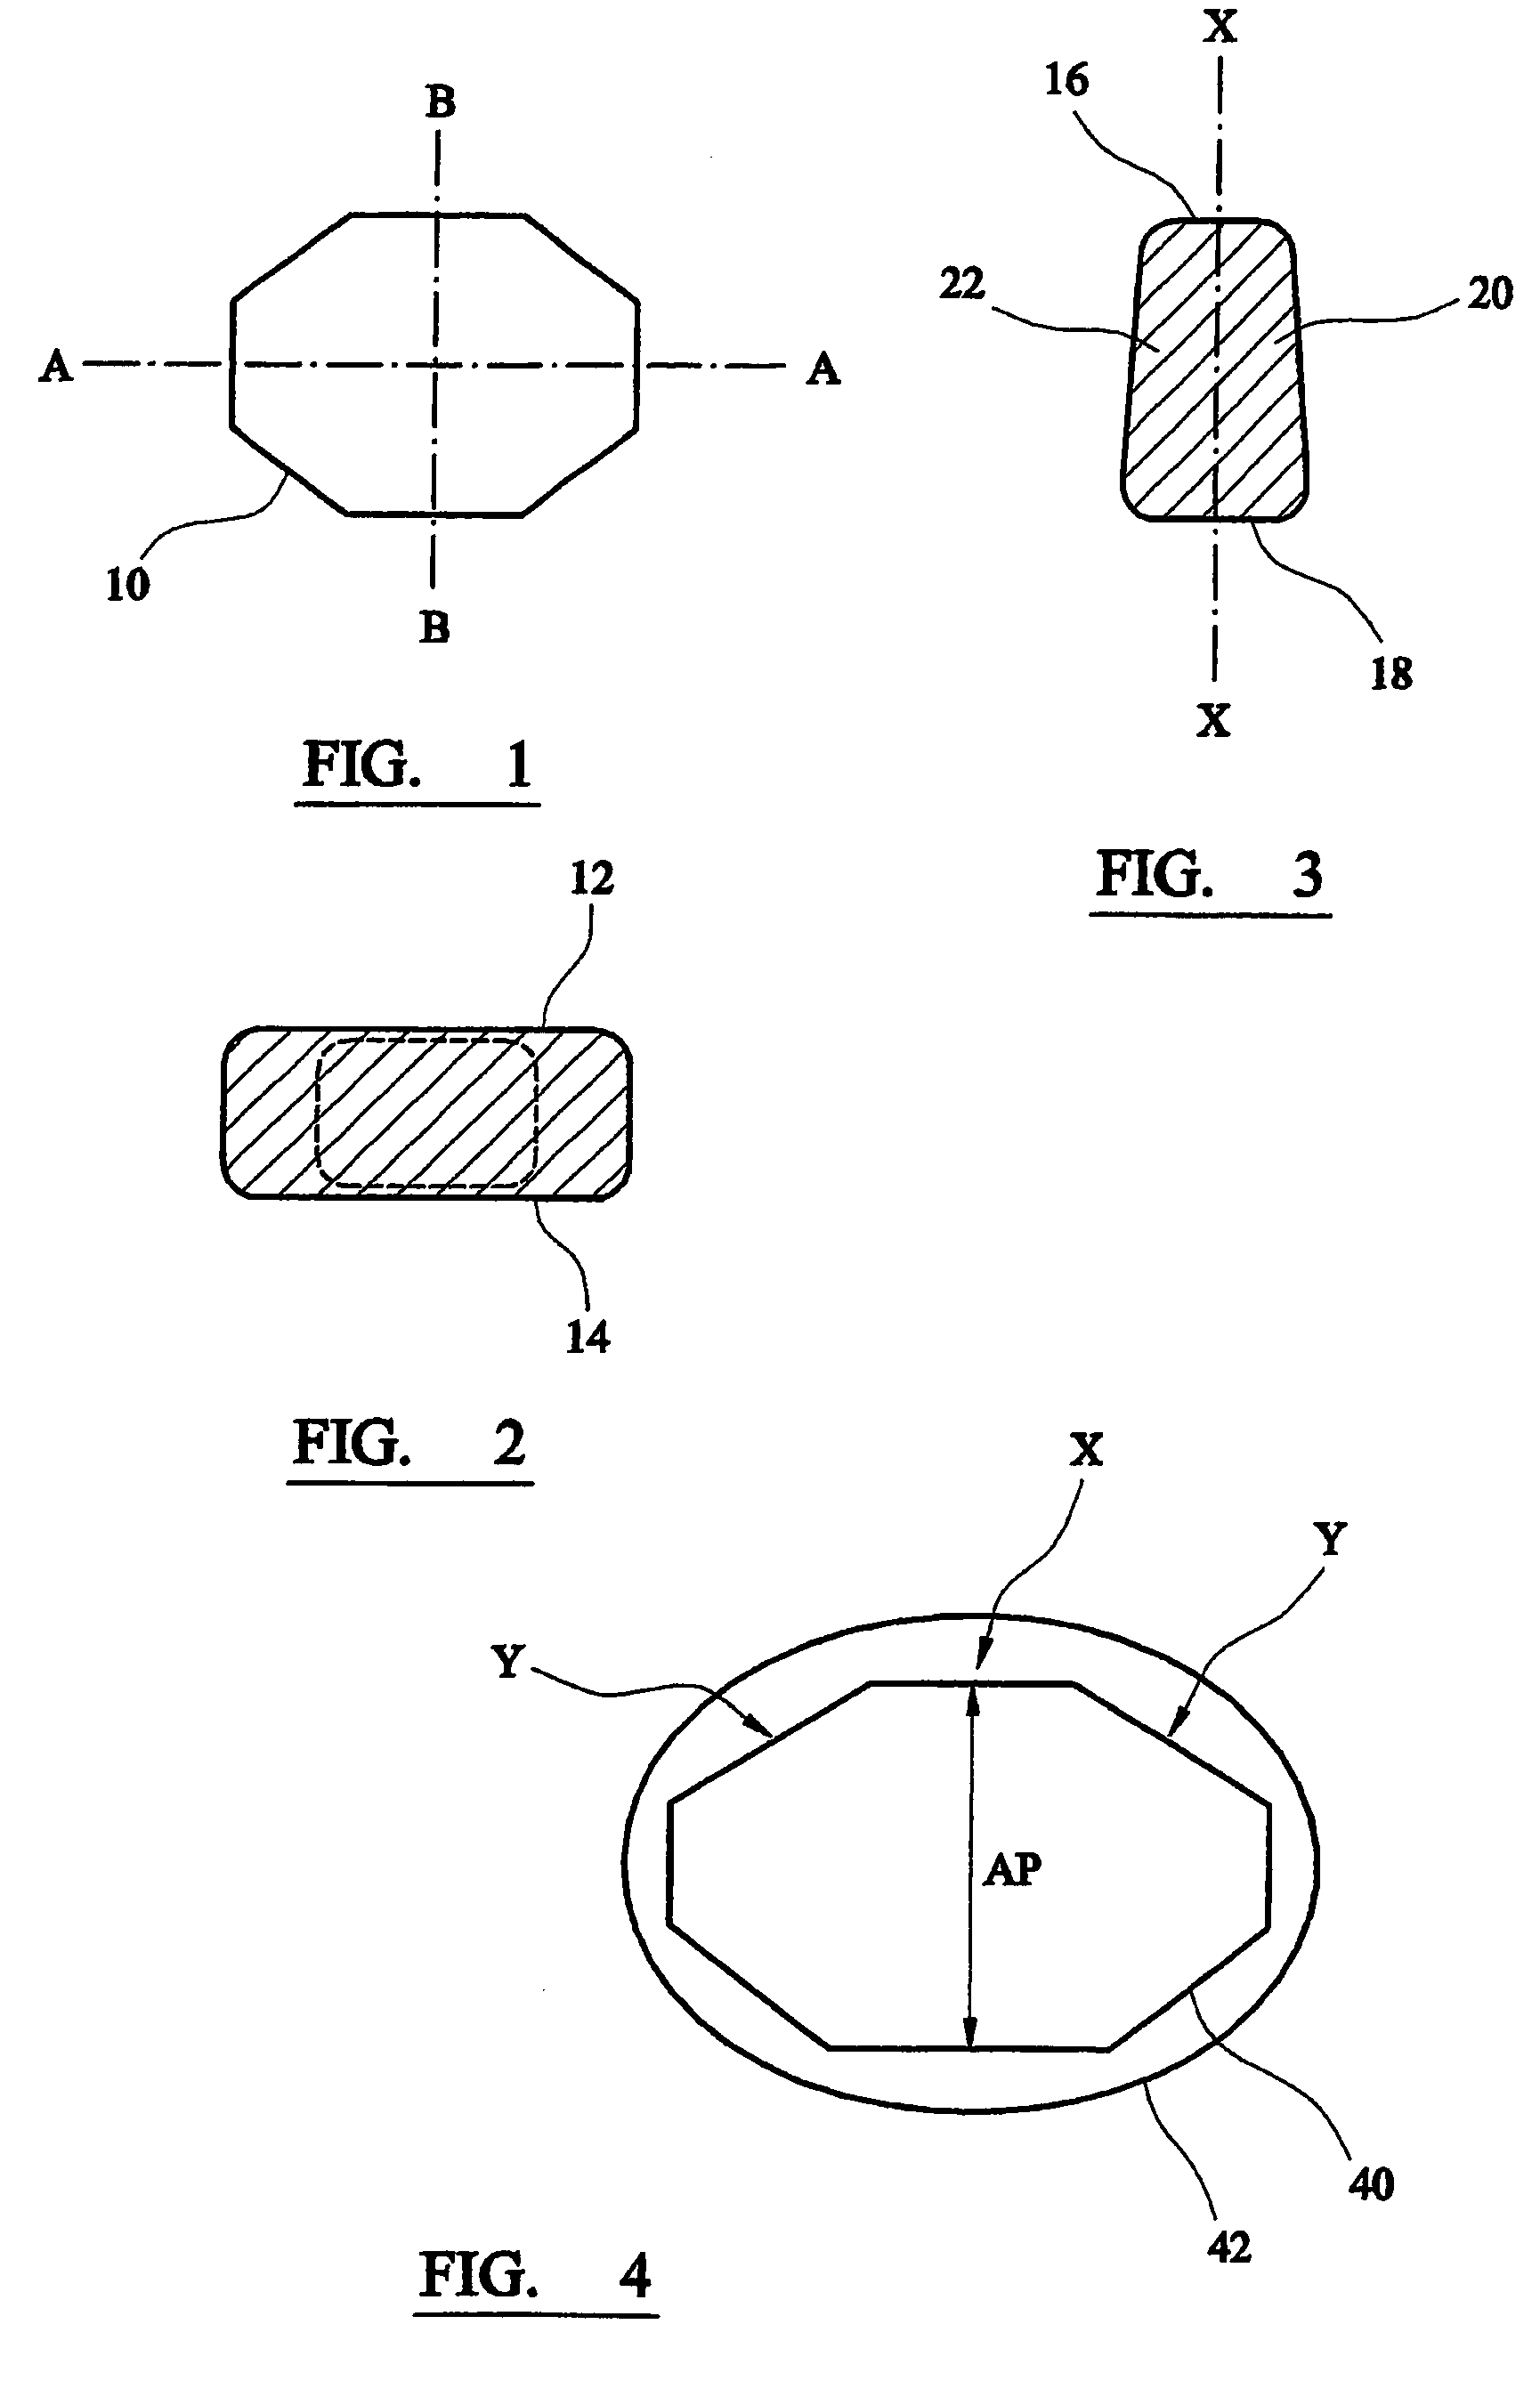 Prosthetic spinal disc and related methods